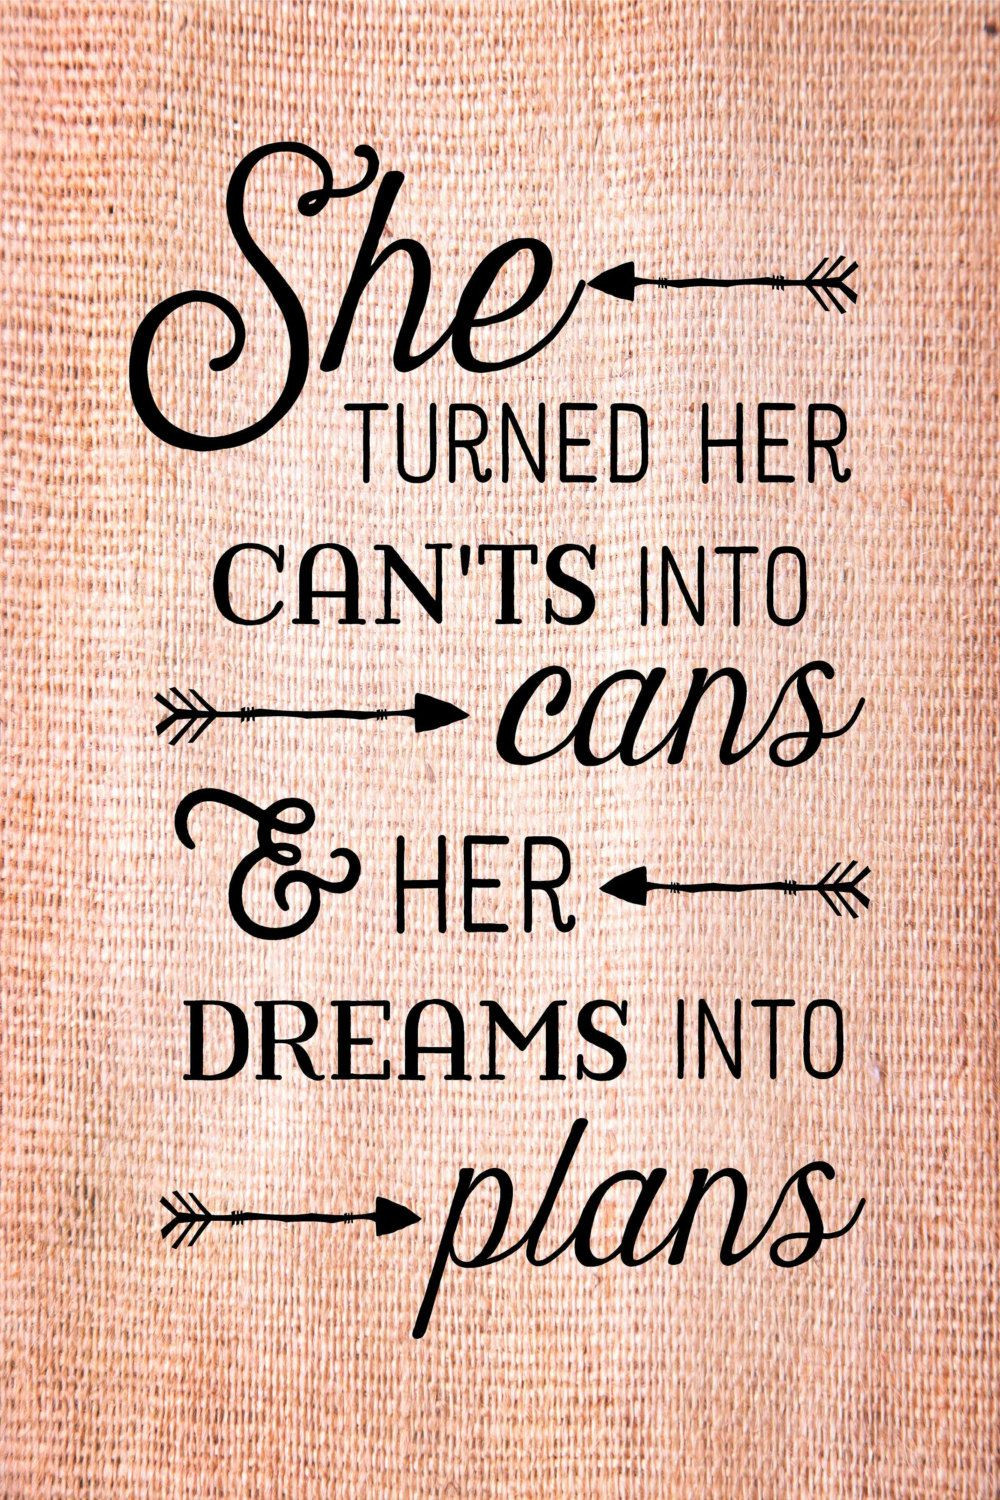 College Graduation Quotes
 Graduation Gift She turned her can ts into cans dreams